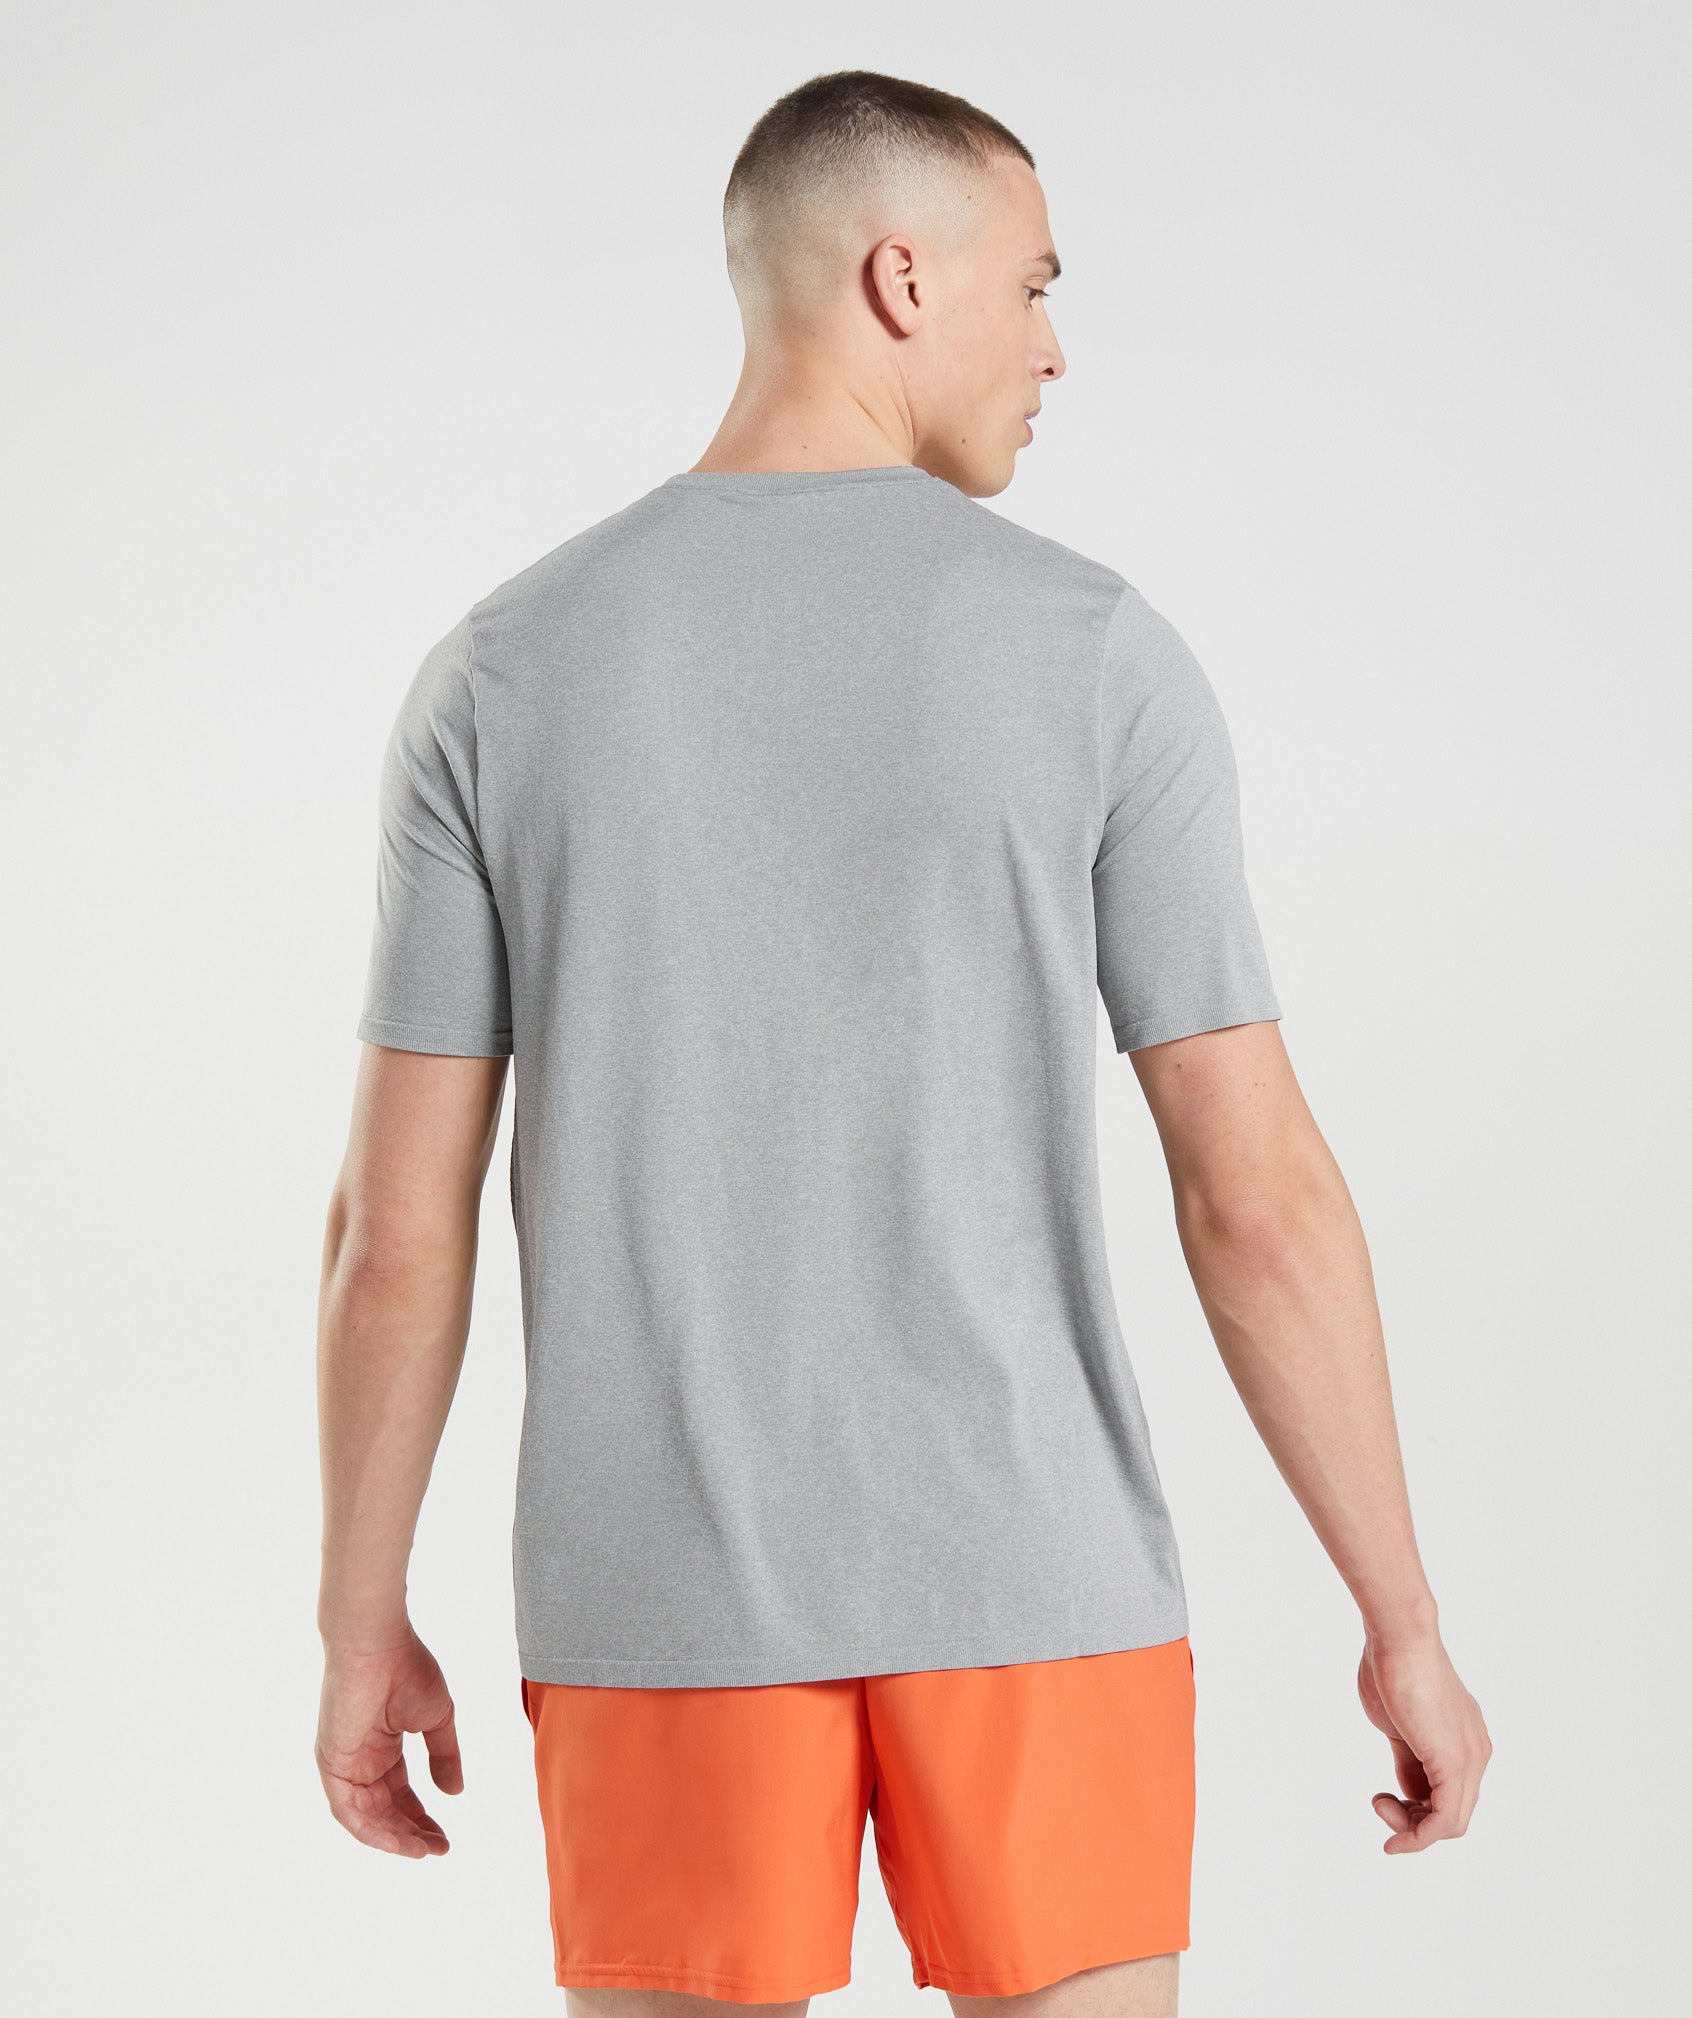 Arrival Seamless T-Shirt in Grey - view 2